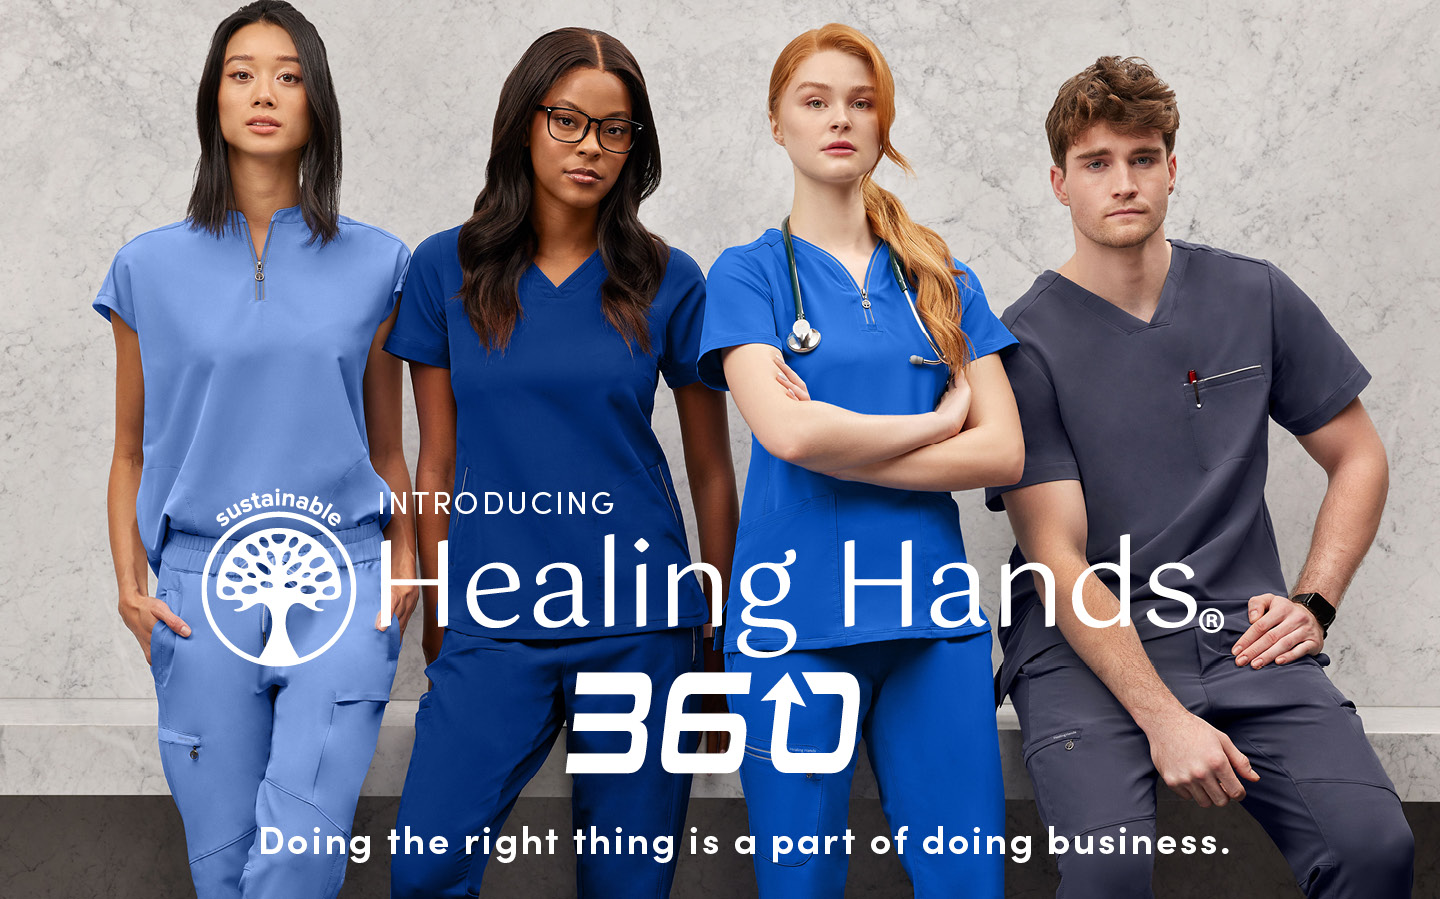 shop 360 by healing hands. doing the right thing is a part of doing business.